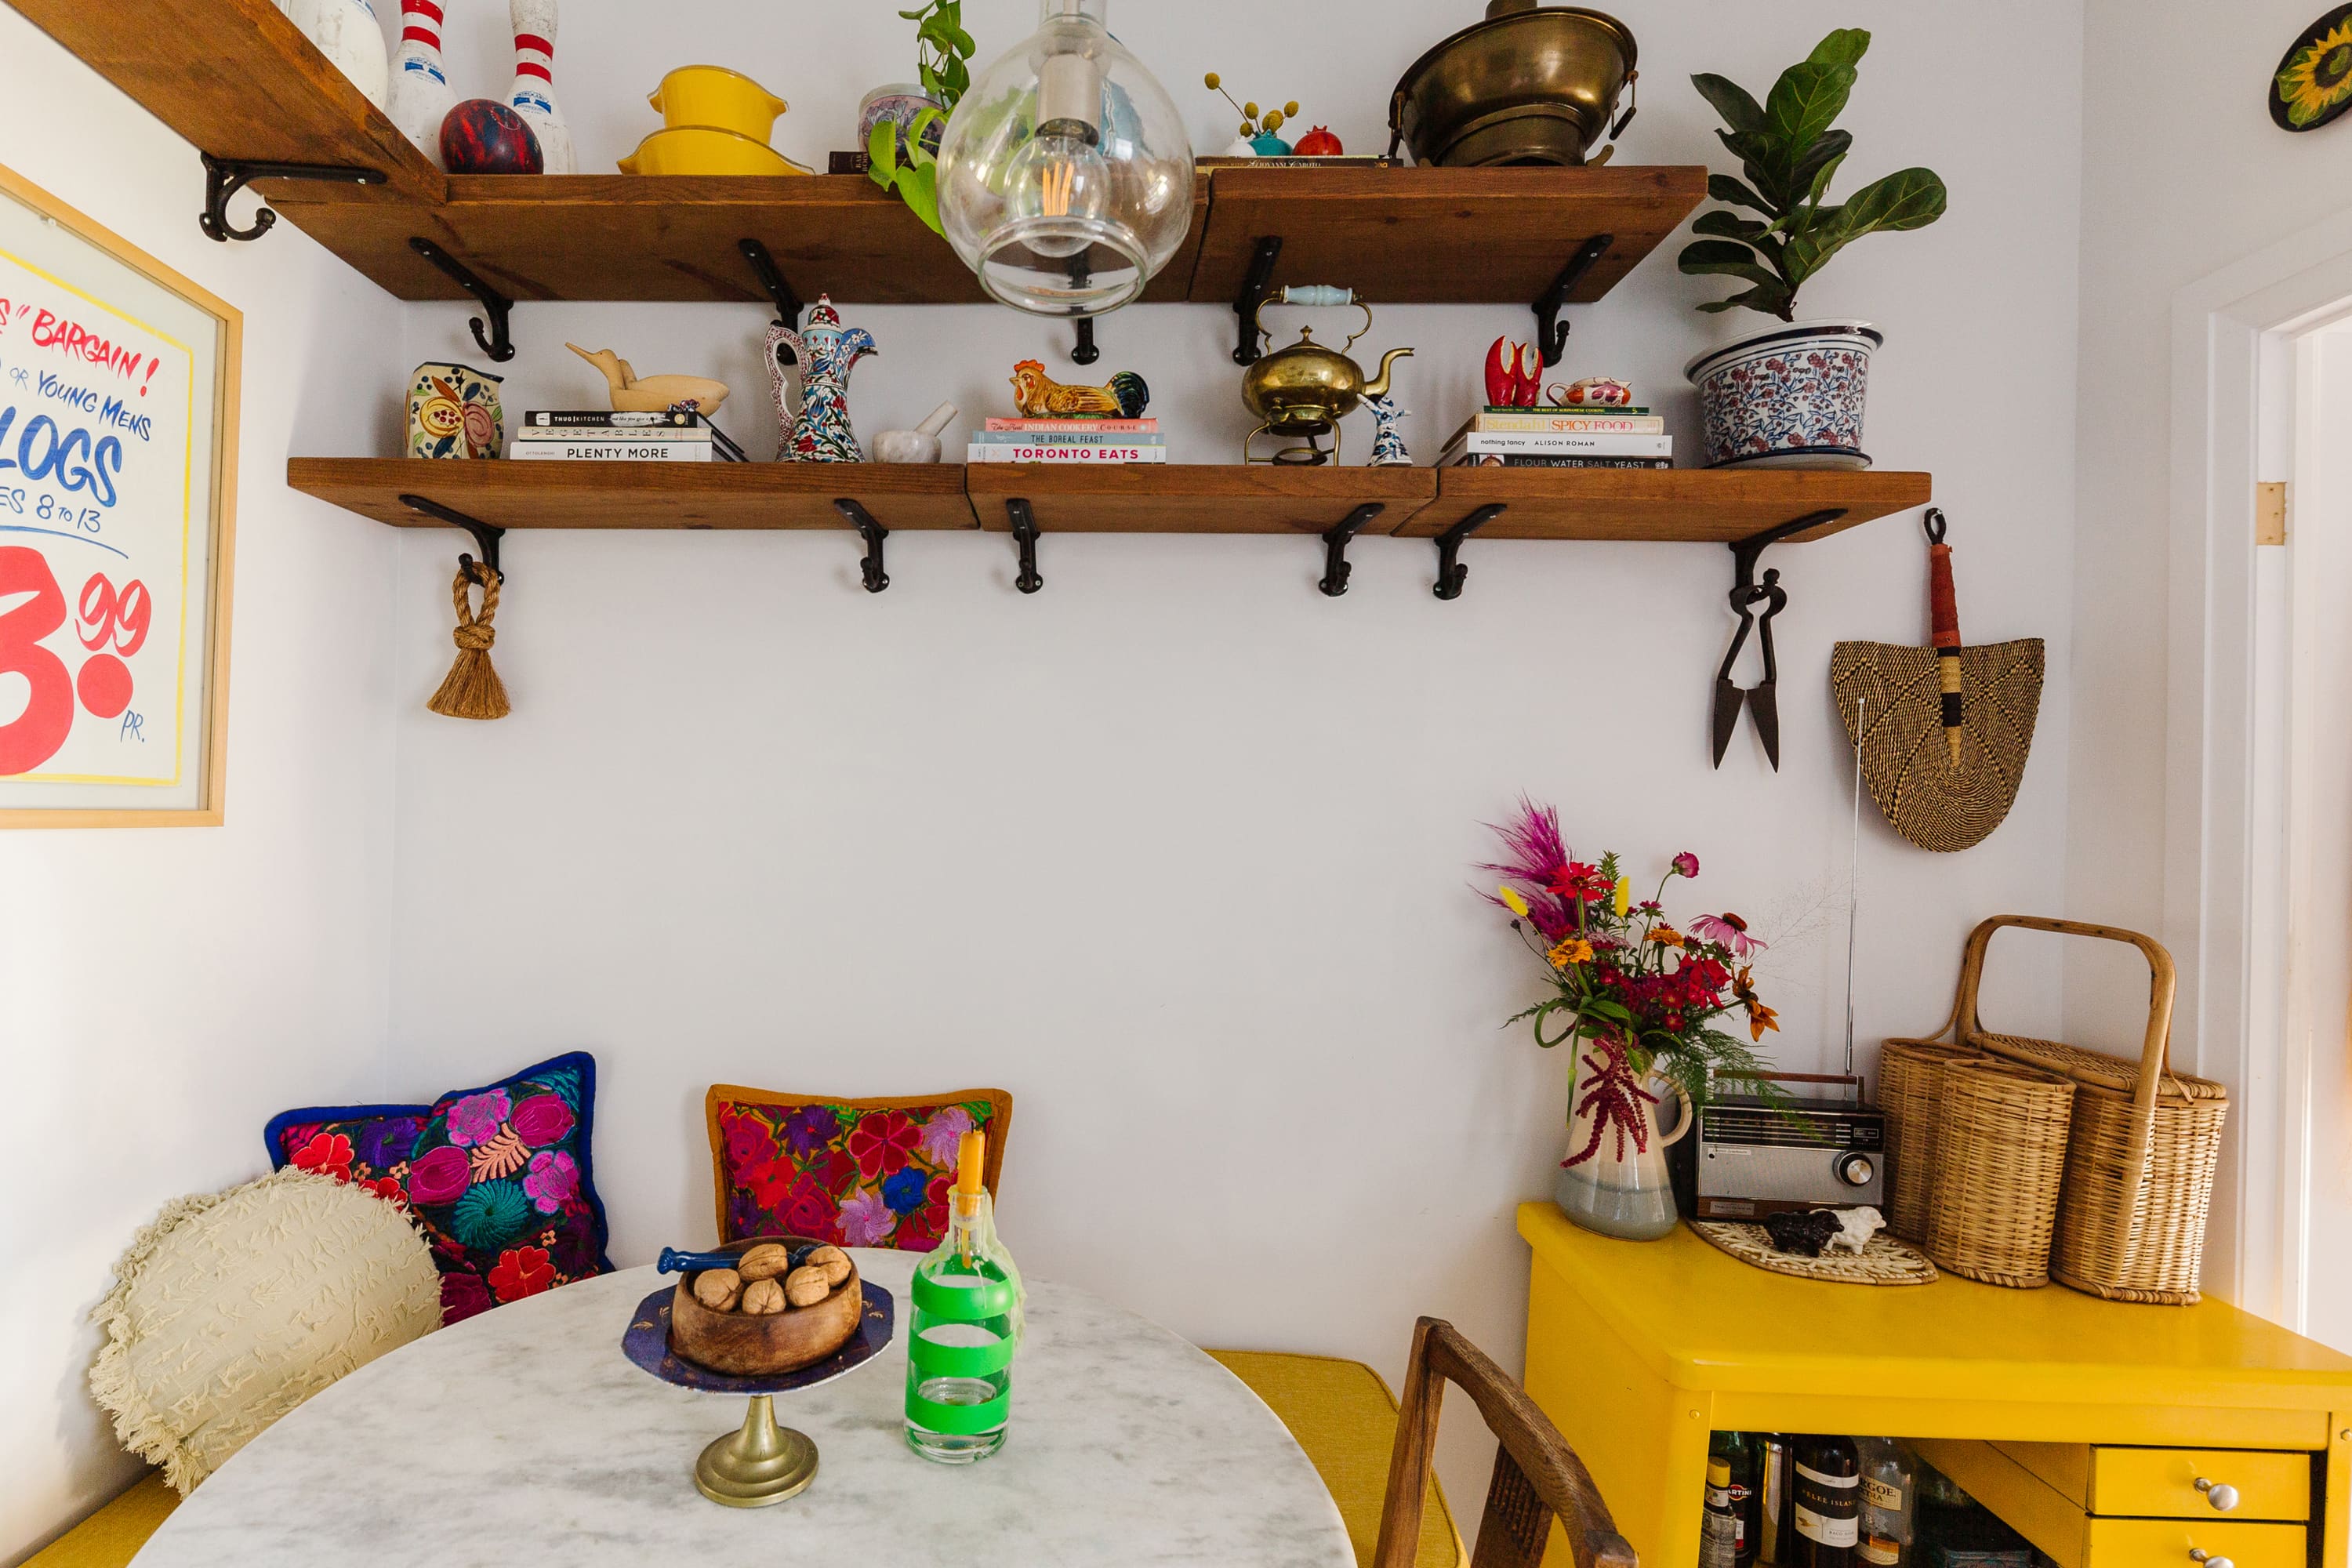 This Breakfast Station Is Exactly What Your Tiny Apartment Needs